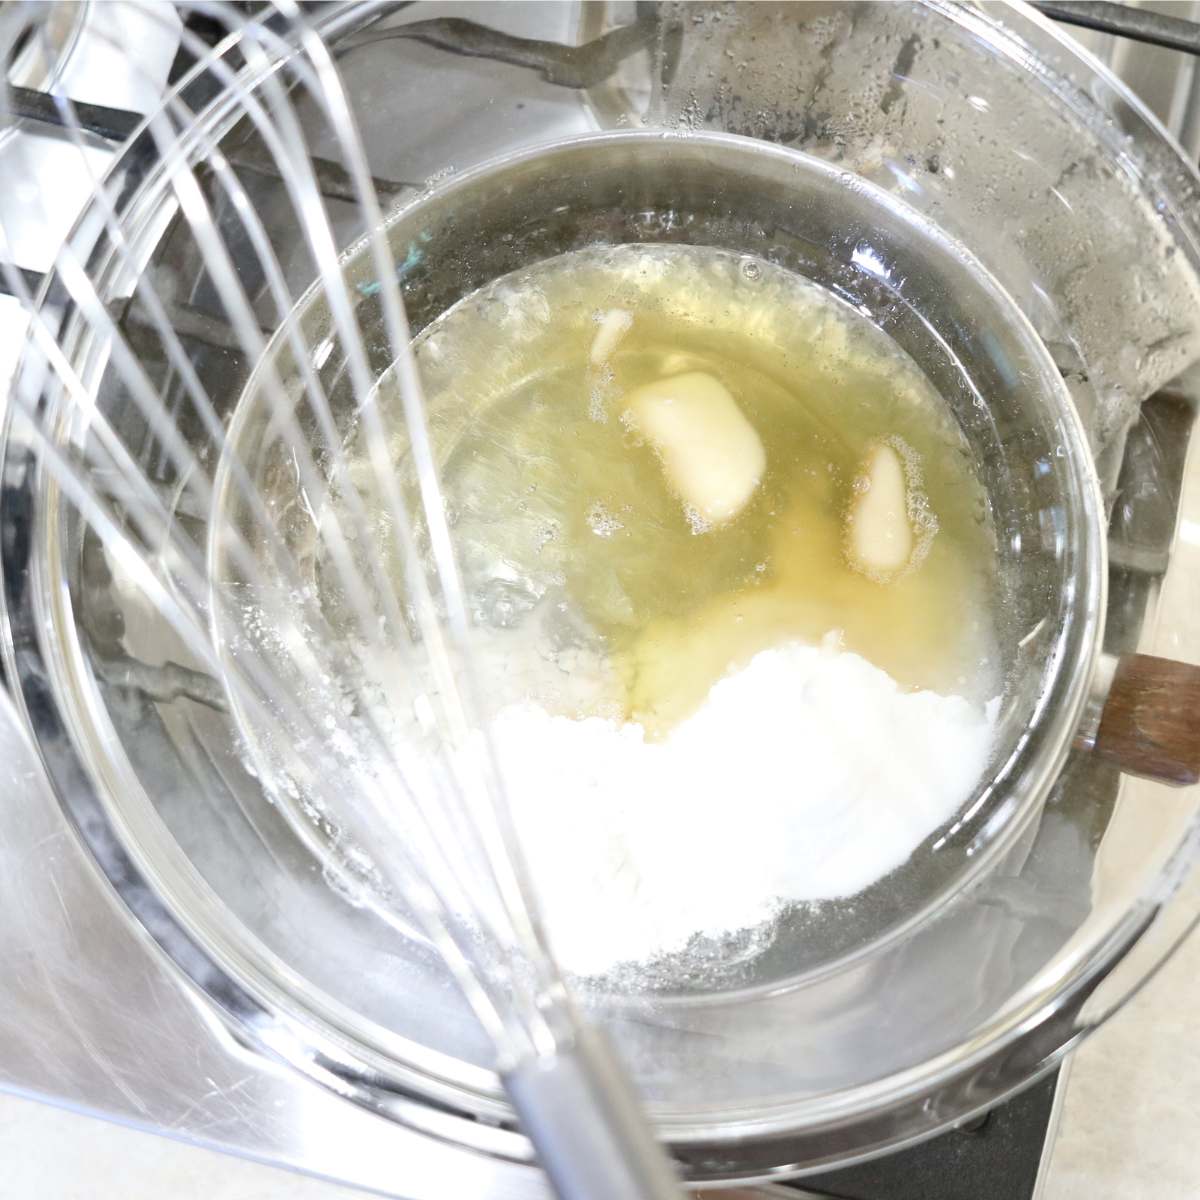 A bowl of homemade deodorant ingredients being melted together using a double broiler pan. A whisk is nearby to stir when needed. The liquid is almost fully melted together.